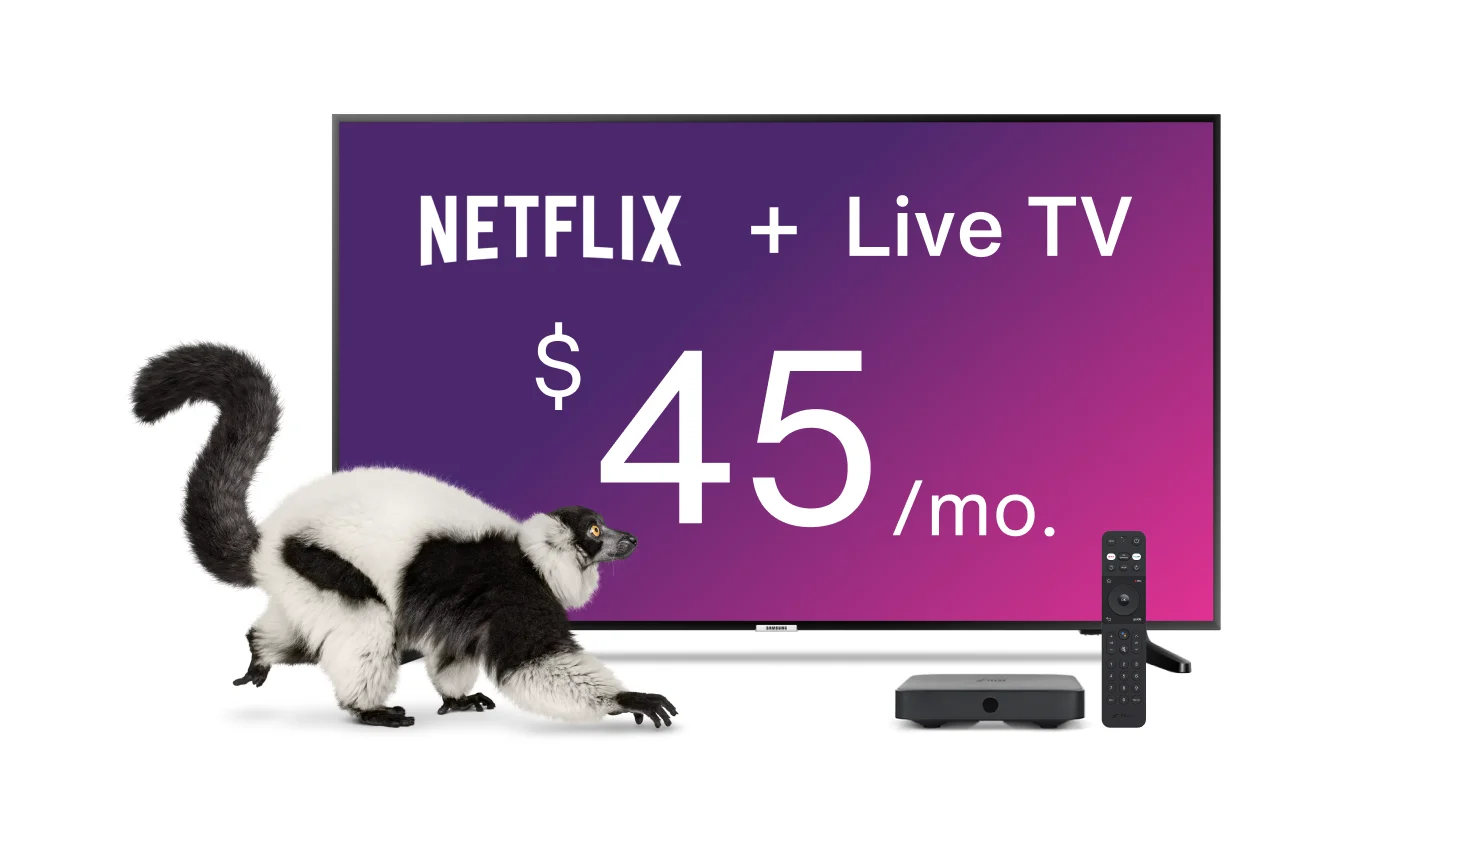 A TV displays the Optik TV offer of live TV and Netflix together with a TELUS TV Digital Box while a lemur looks on.